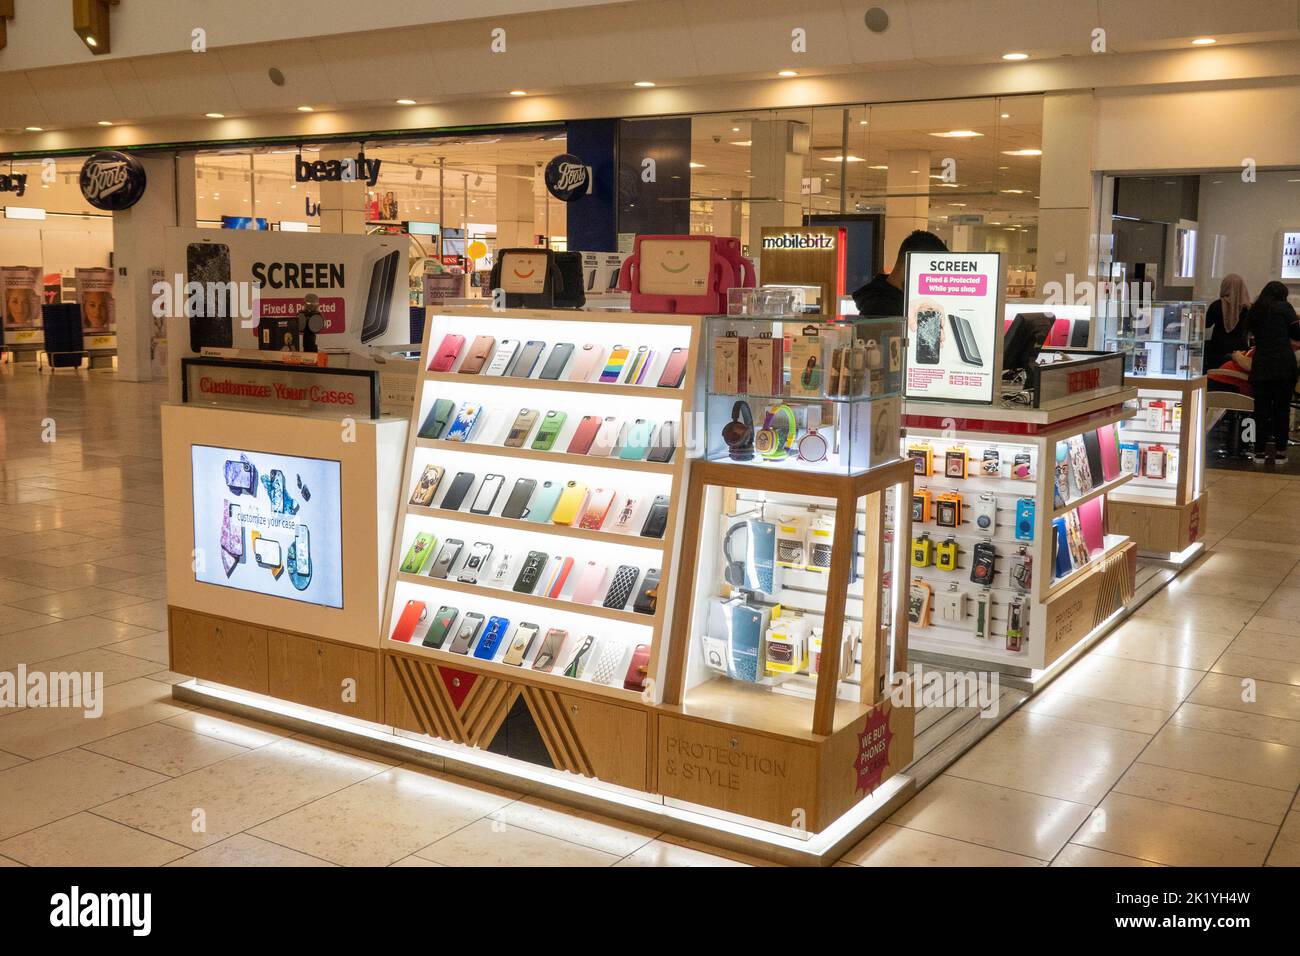 A view of the Mobilebitz kiosk in Chantry Place Shopping Mall in Norwich Stock Photo